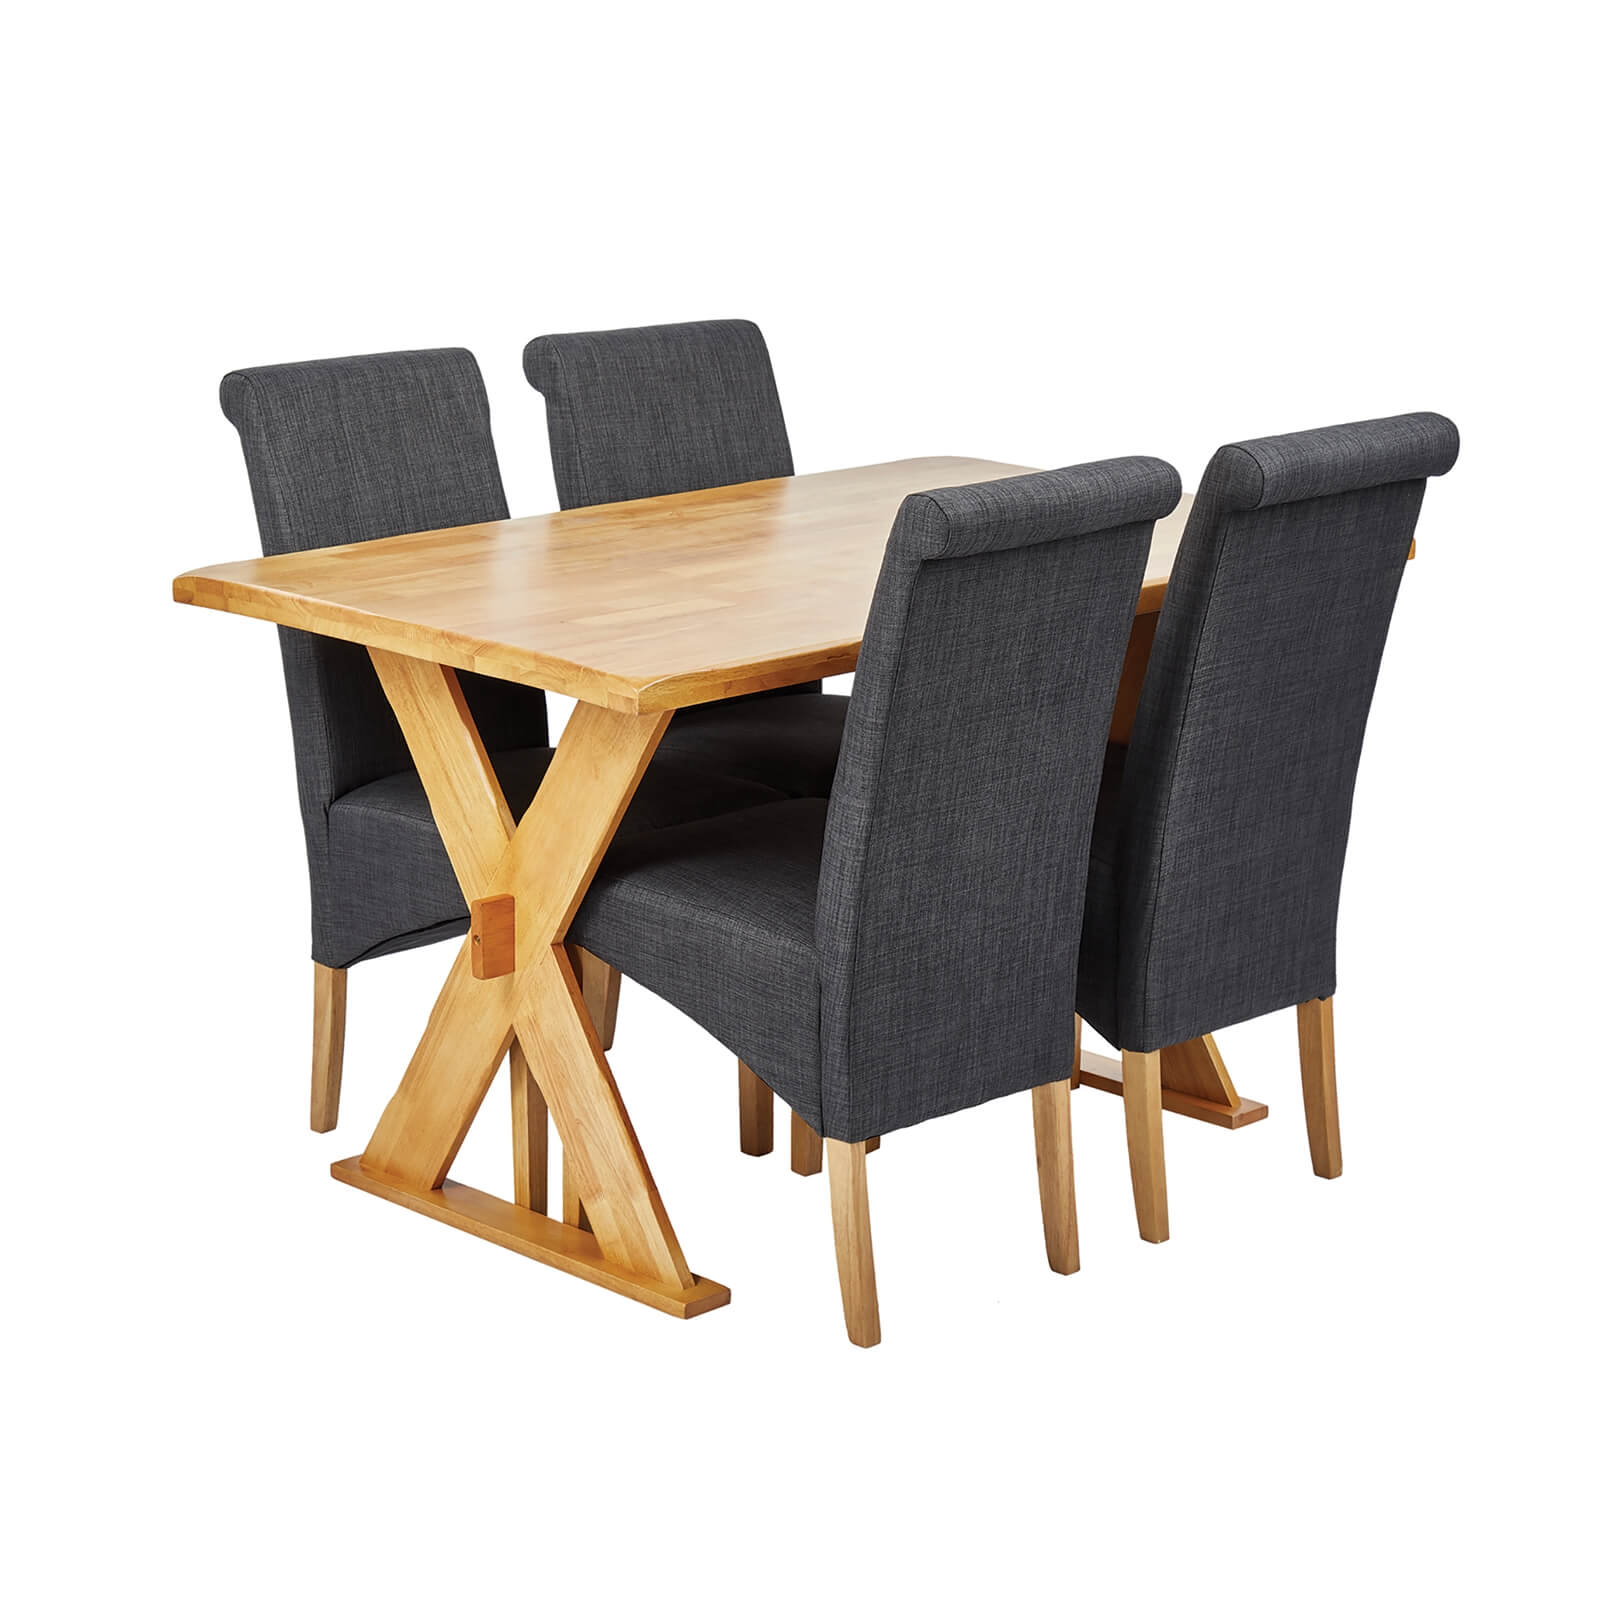 Seville 4 Seater Dining Set - Amelia Dining Chairs - Grey